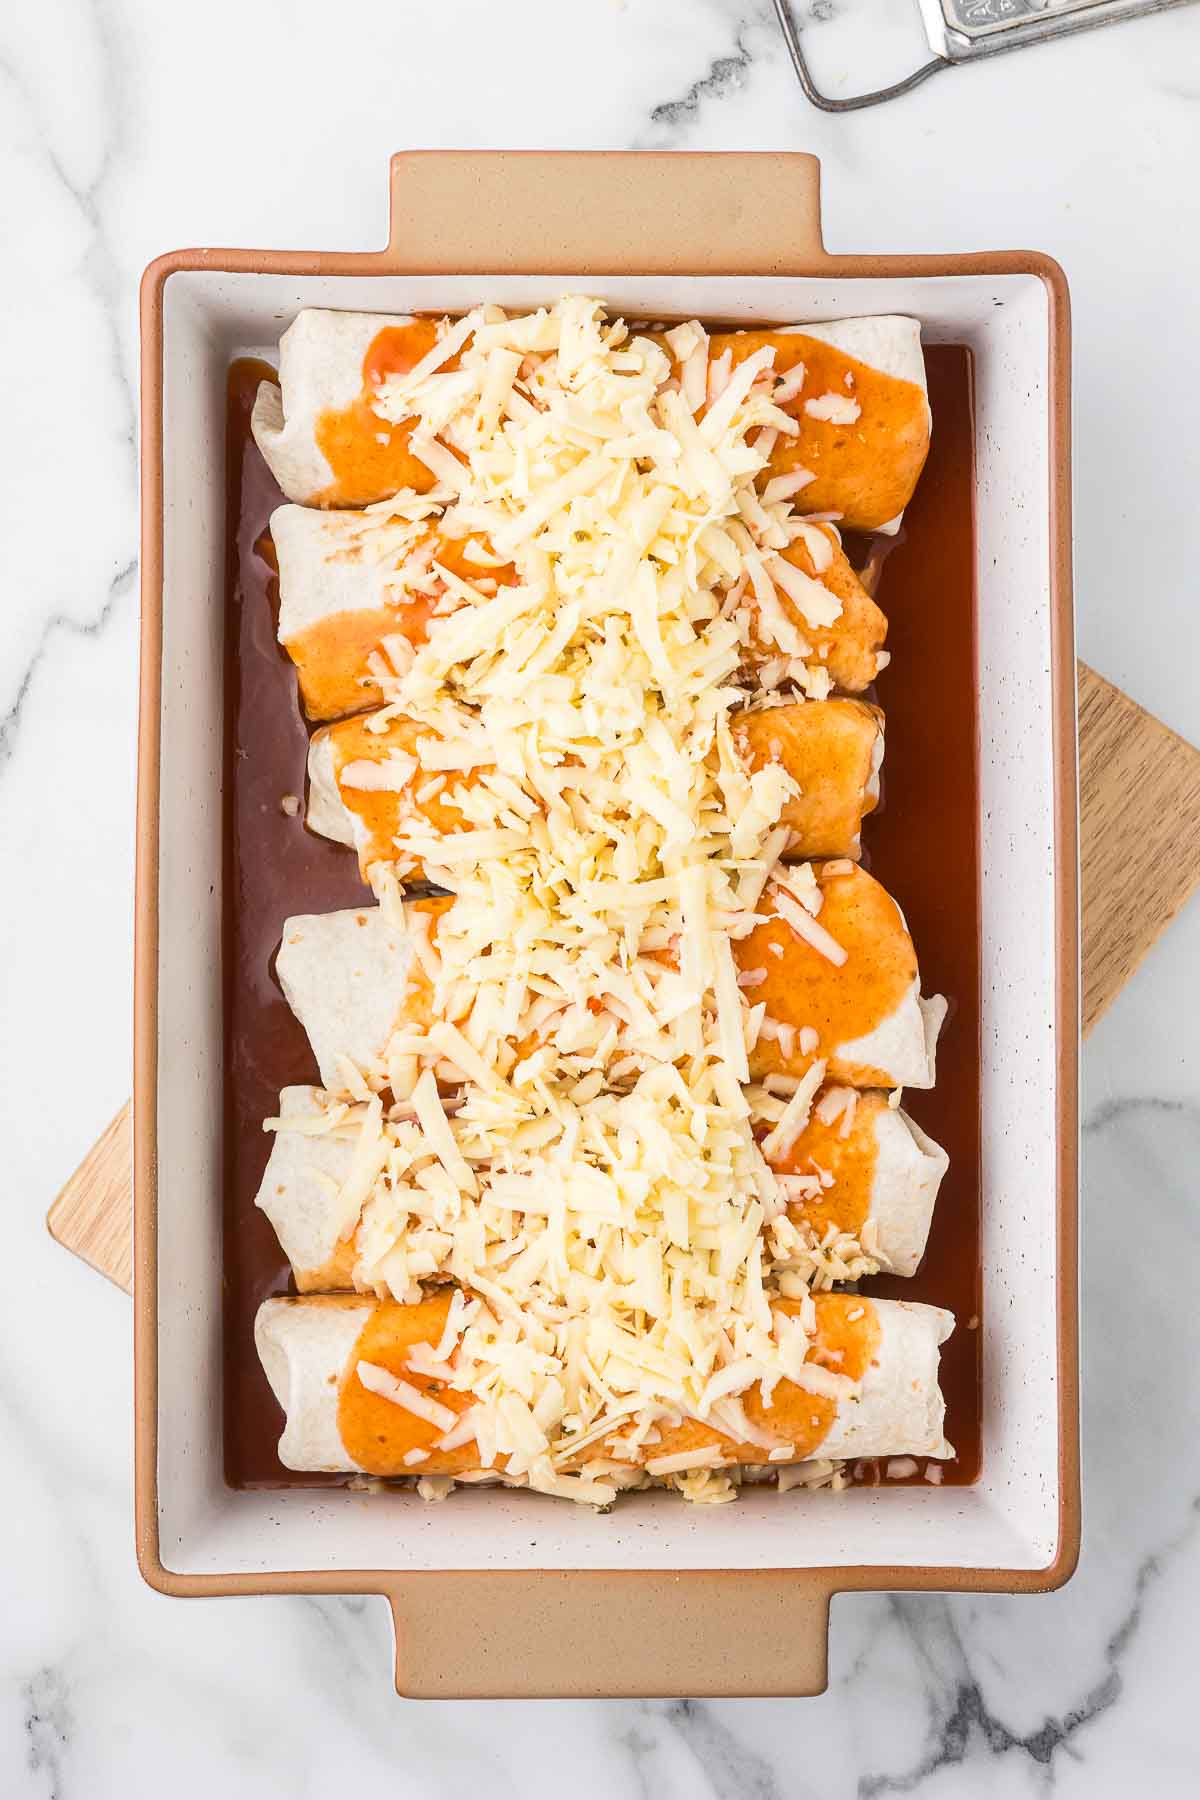 Pulled Pork burritos, enchilada sauce, hot sauce and shredded cheese in a casserole dish on a wooden cutting board.